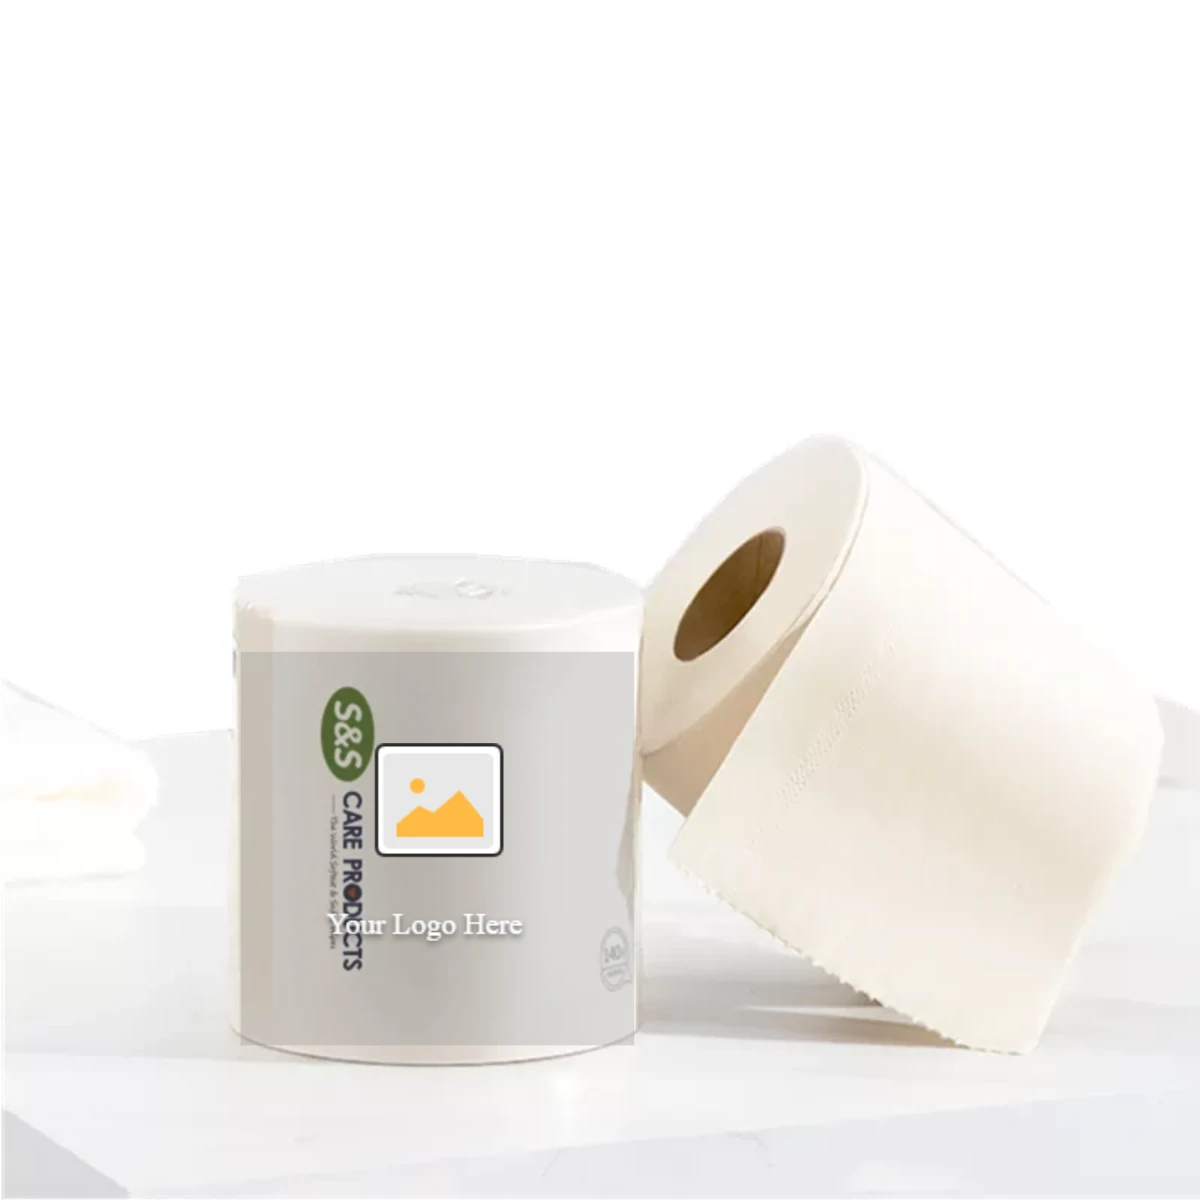 OEM Individually Wrapped Sanitary Soft Tissue Roll Toilet Paper